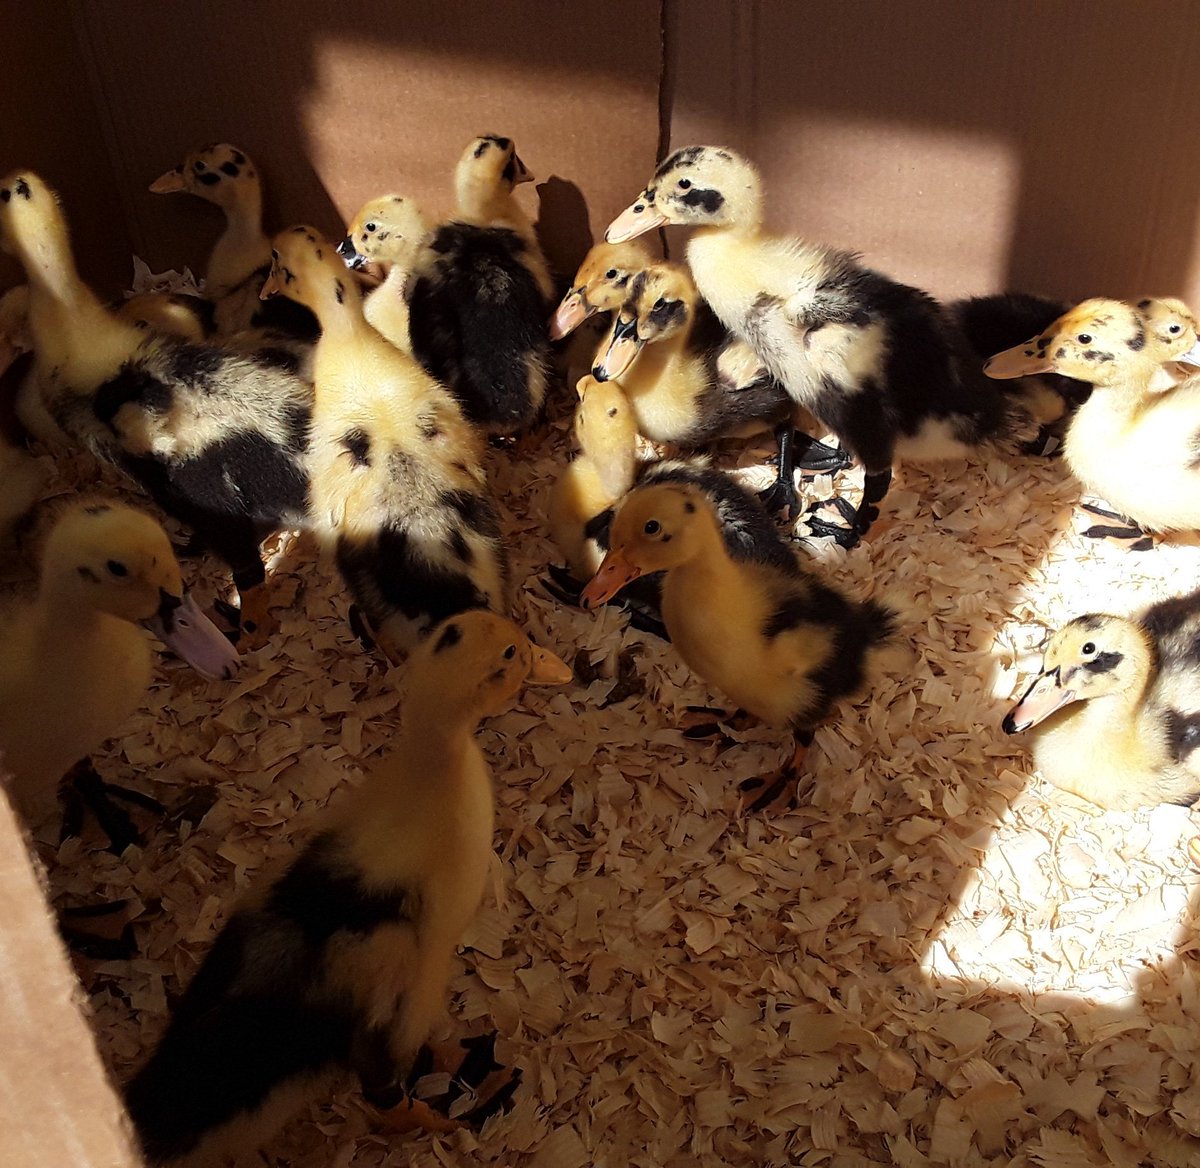 Ducklings went out to the temporary, but much larger brooder, I quickly made out on the porch. They are getting so big already, their white down is starting to really come in 😍 #anconaducks #ducklings #heritagebreed #livestockconservancy #raiseyourownfood #my200yearoldfarmhouse